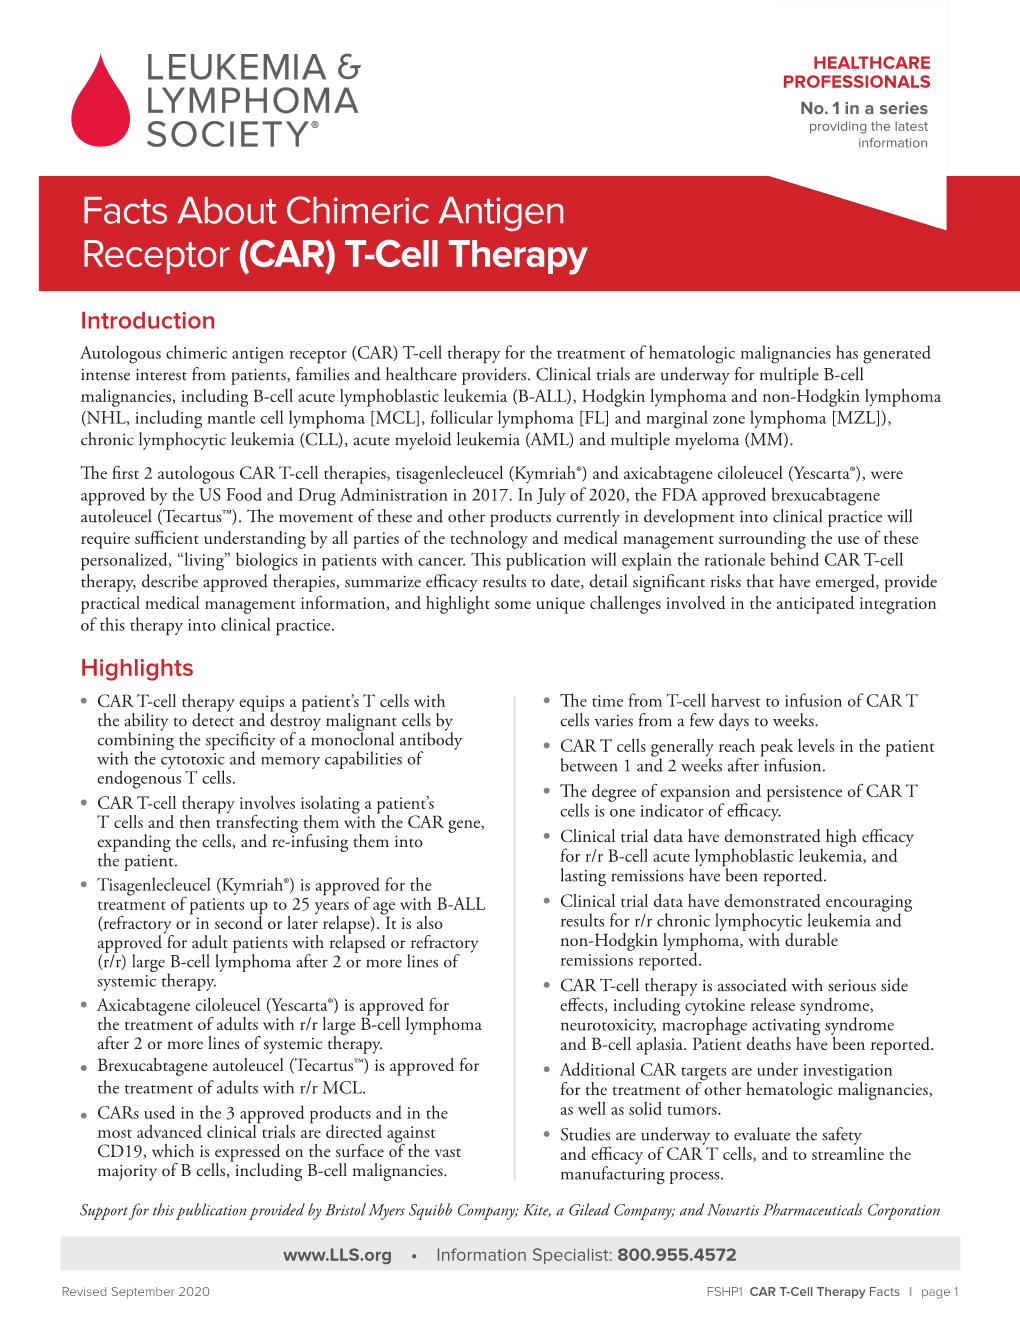 Facts About Chimeric Antigen Receptor (CAR) T-Cell Therapy